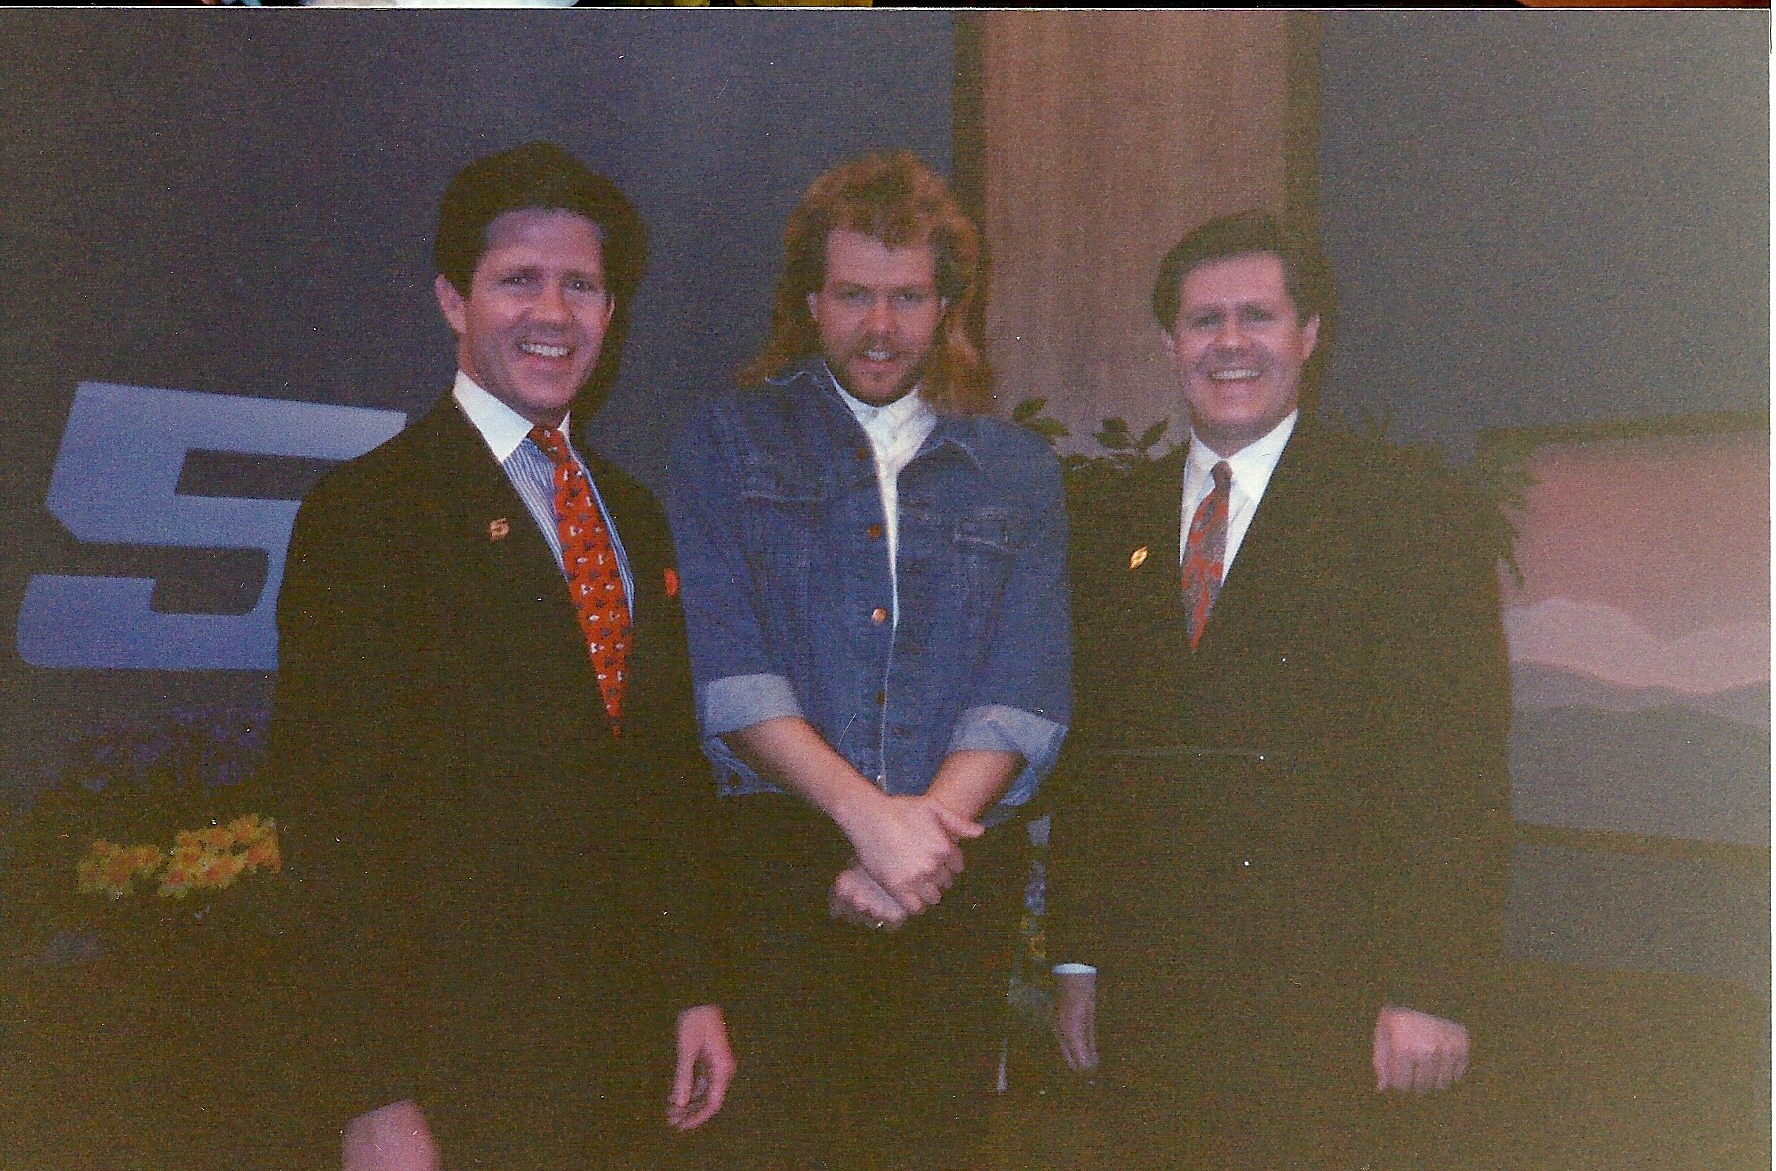 Butch McCain, Toby Keith and Ben McCain on the set of Good Morning Oklahoma.